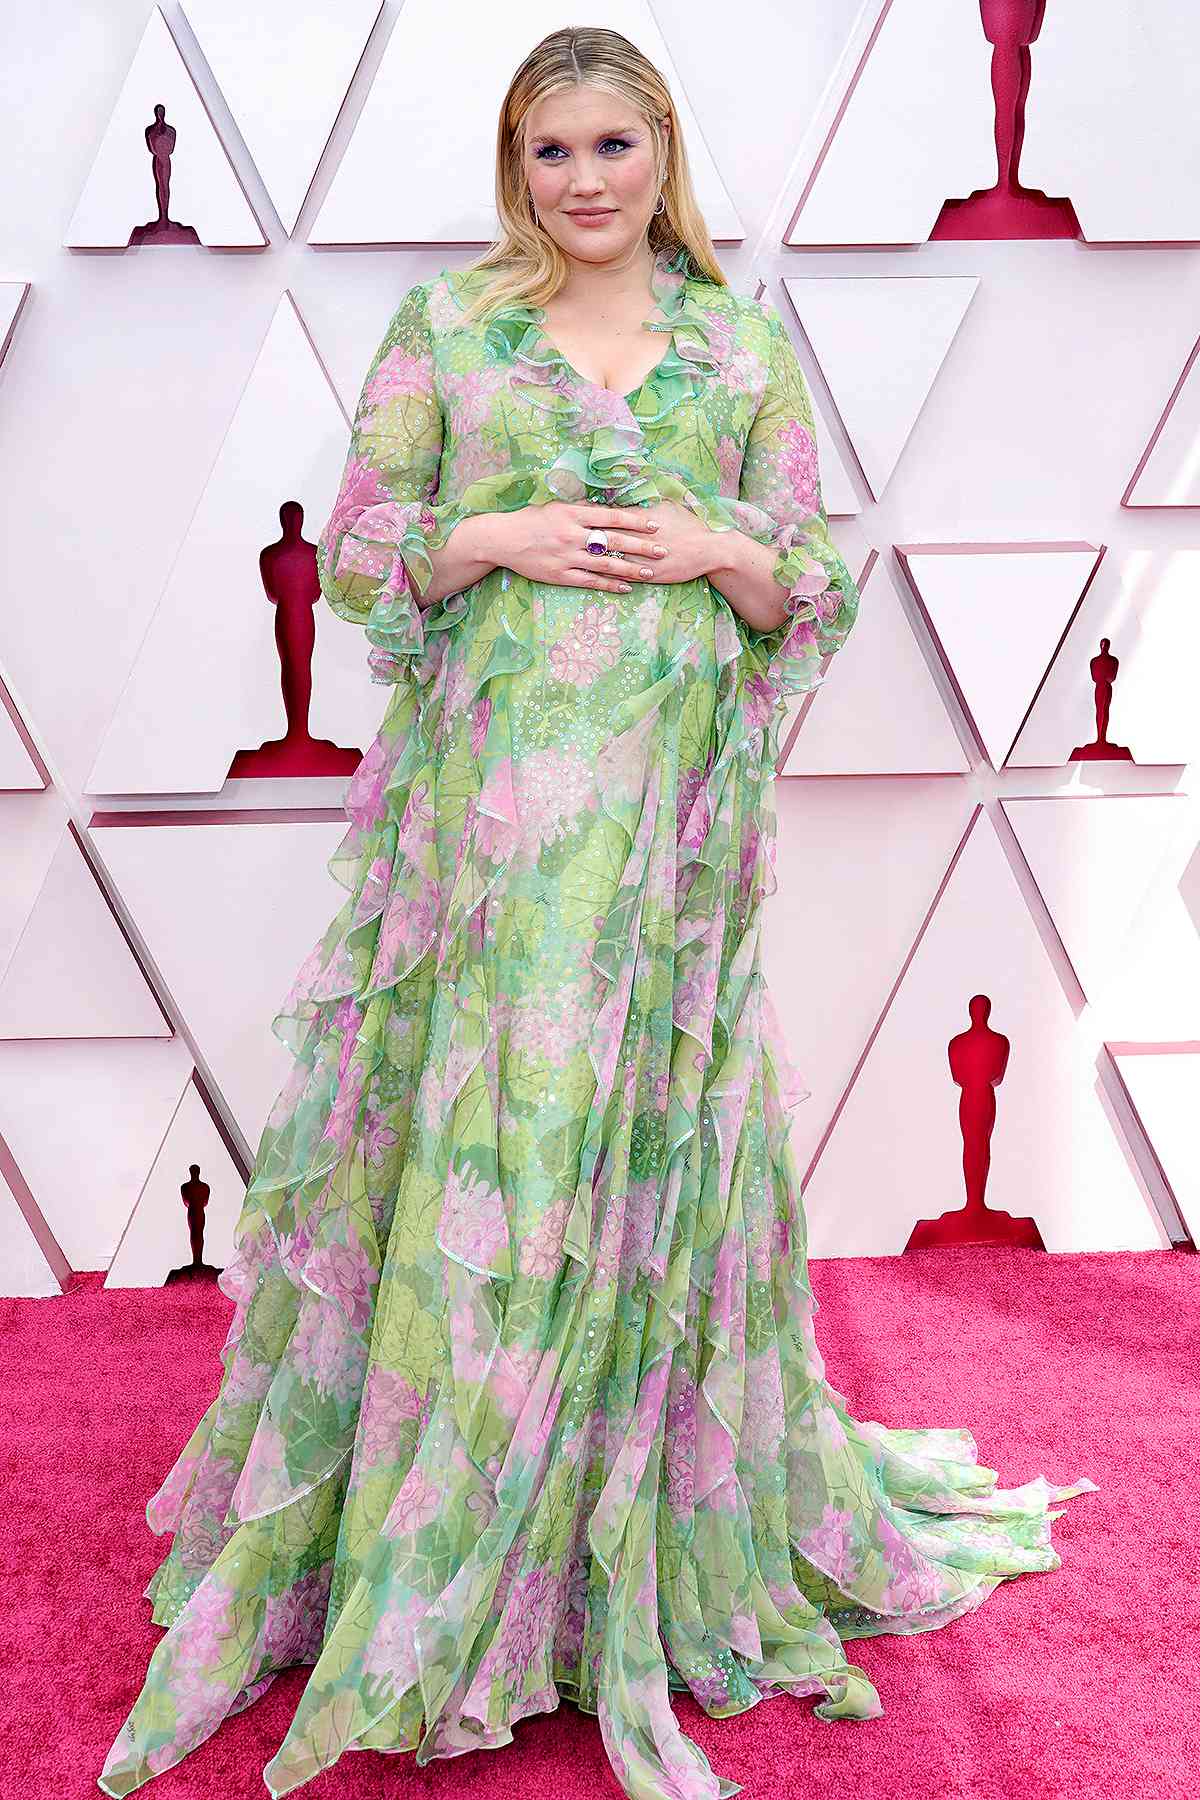 Emerald Fennell Pregnant, Debuts Baby Bump at Oscars 2021 | PEOPLE.com